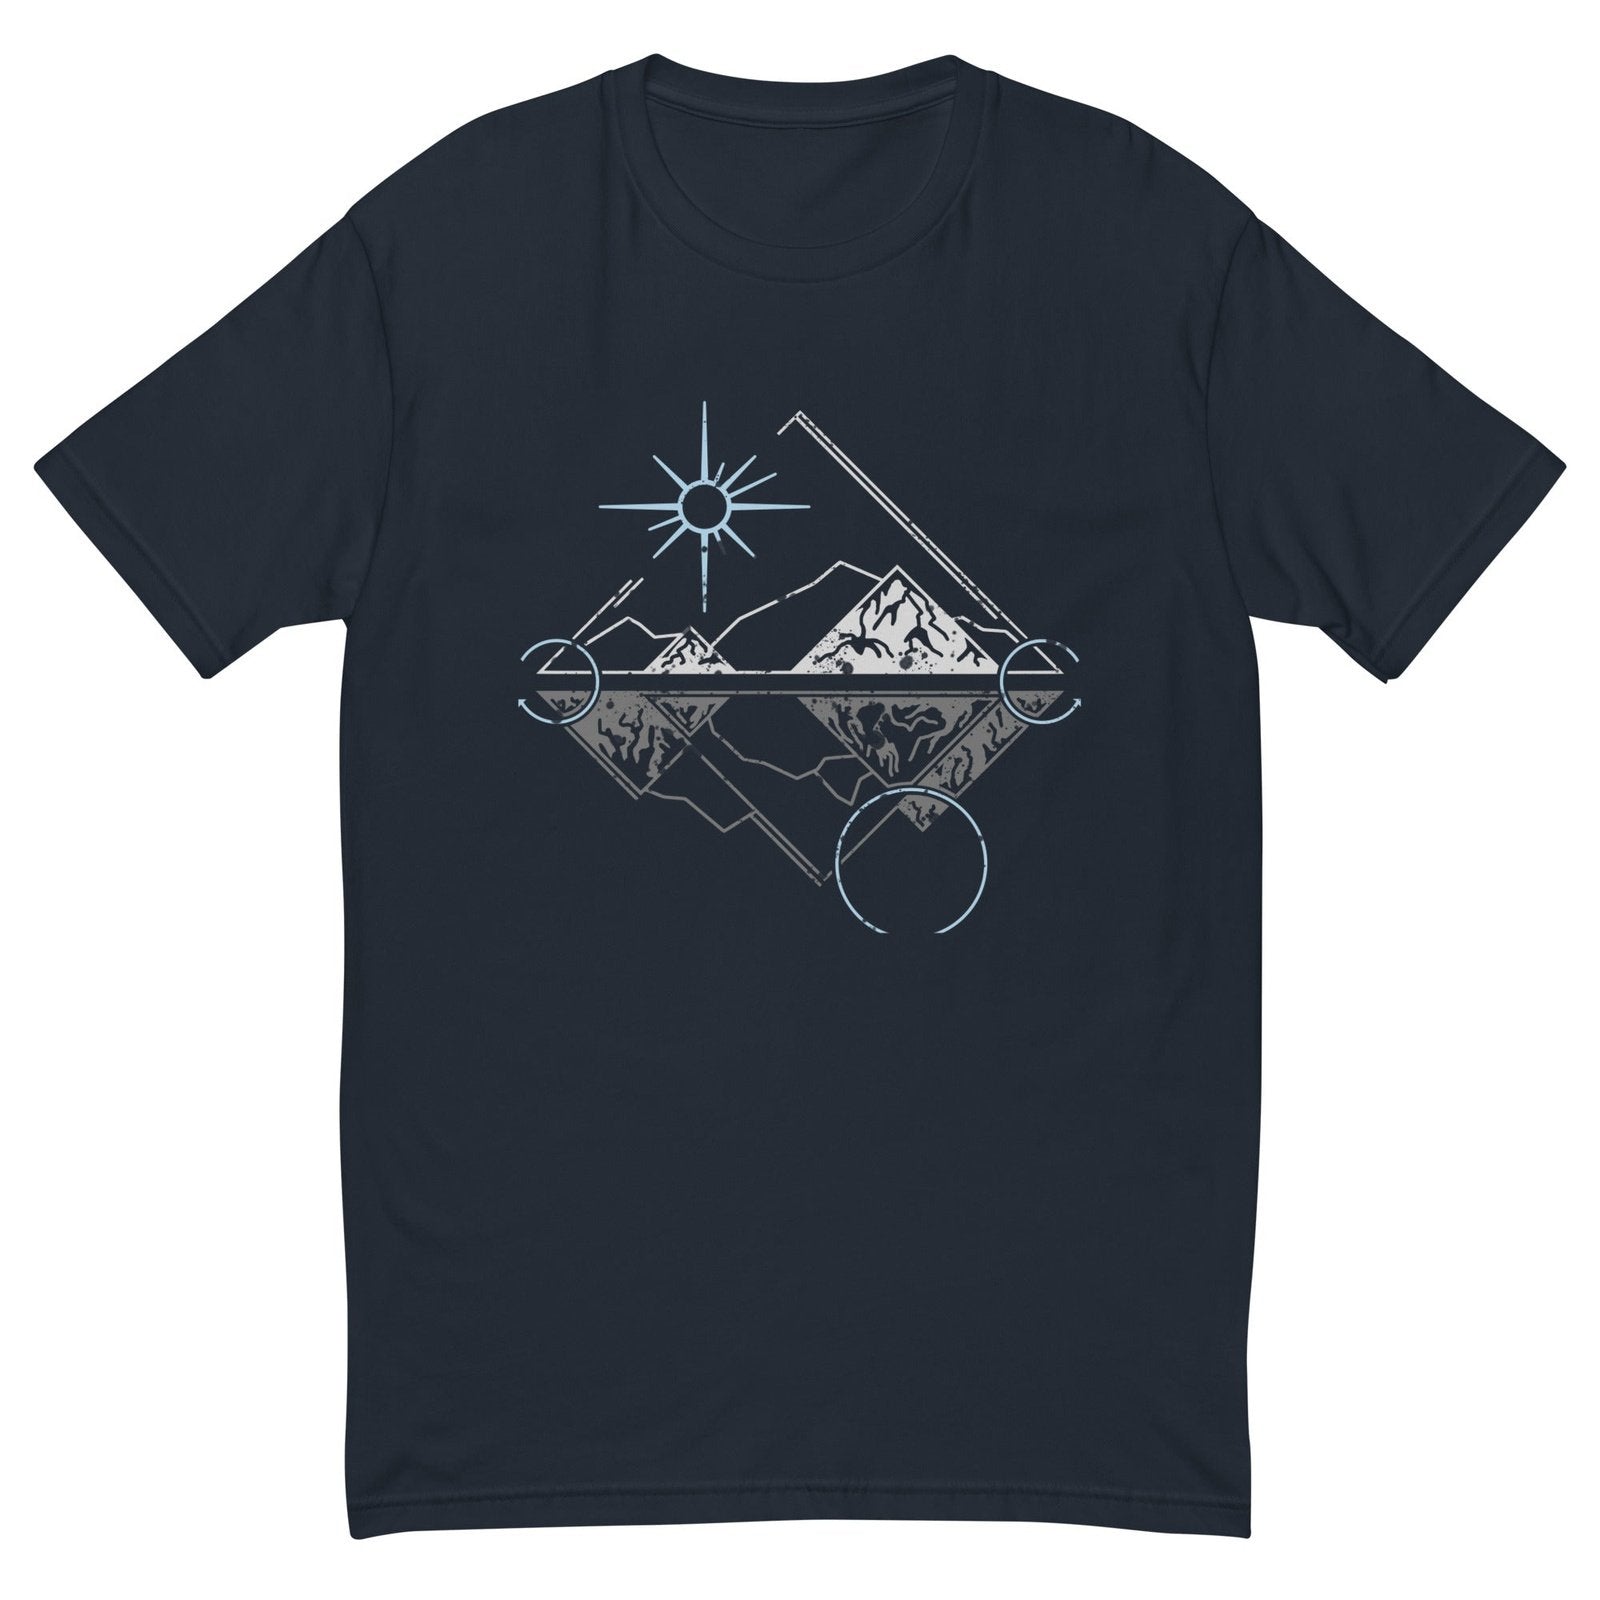 Geometric Sun and Moon Over Mountains Men's Fitted Short Sleeve T-shirt